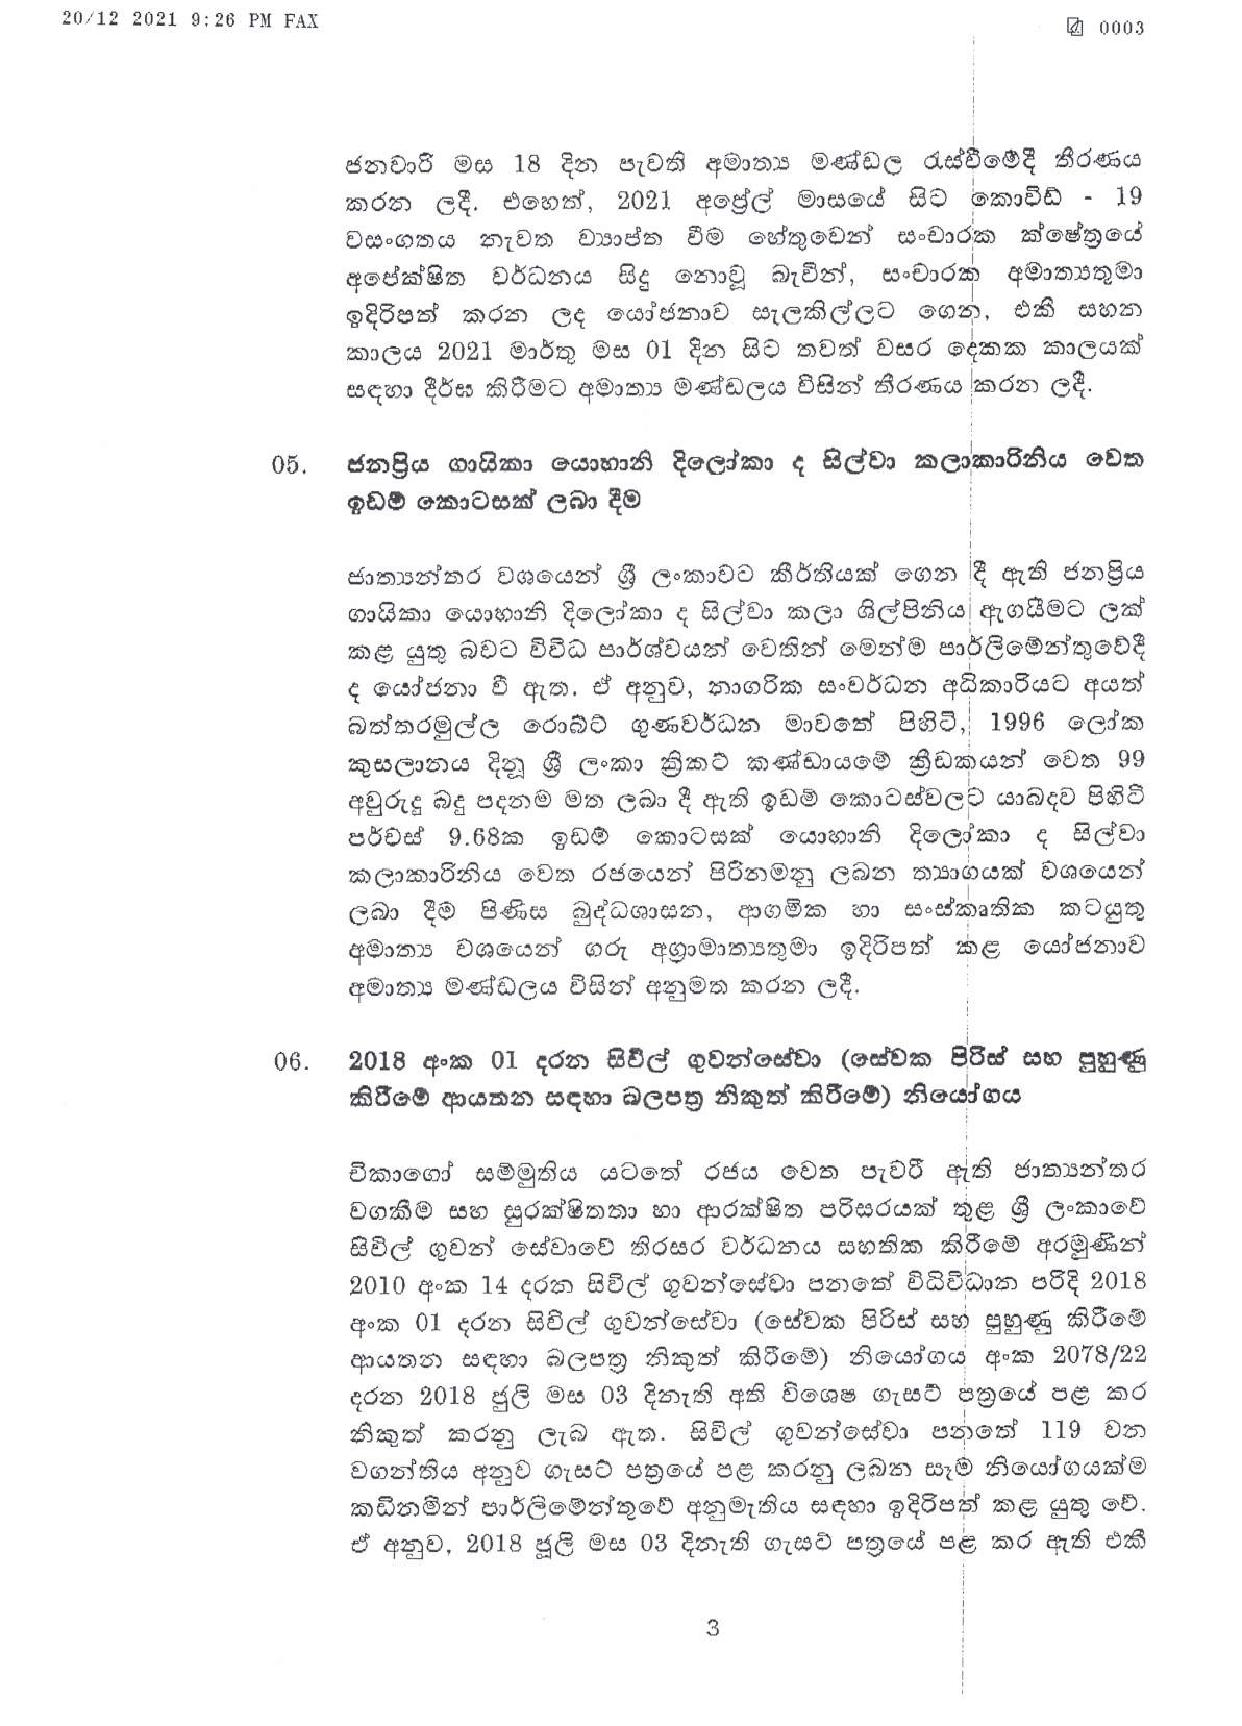 Cabinet Decisions on 20.12.2021 page 003